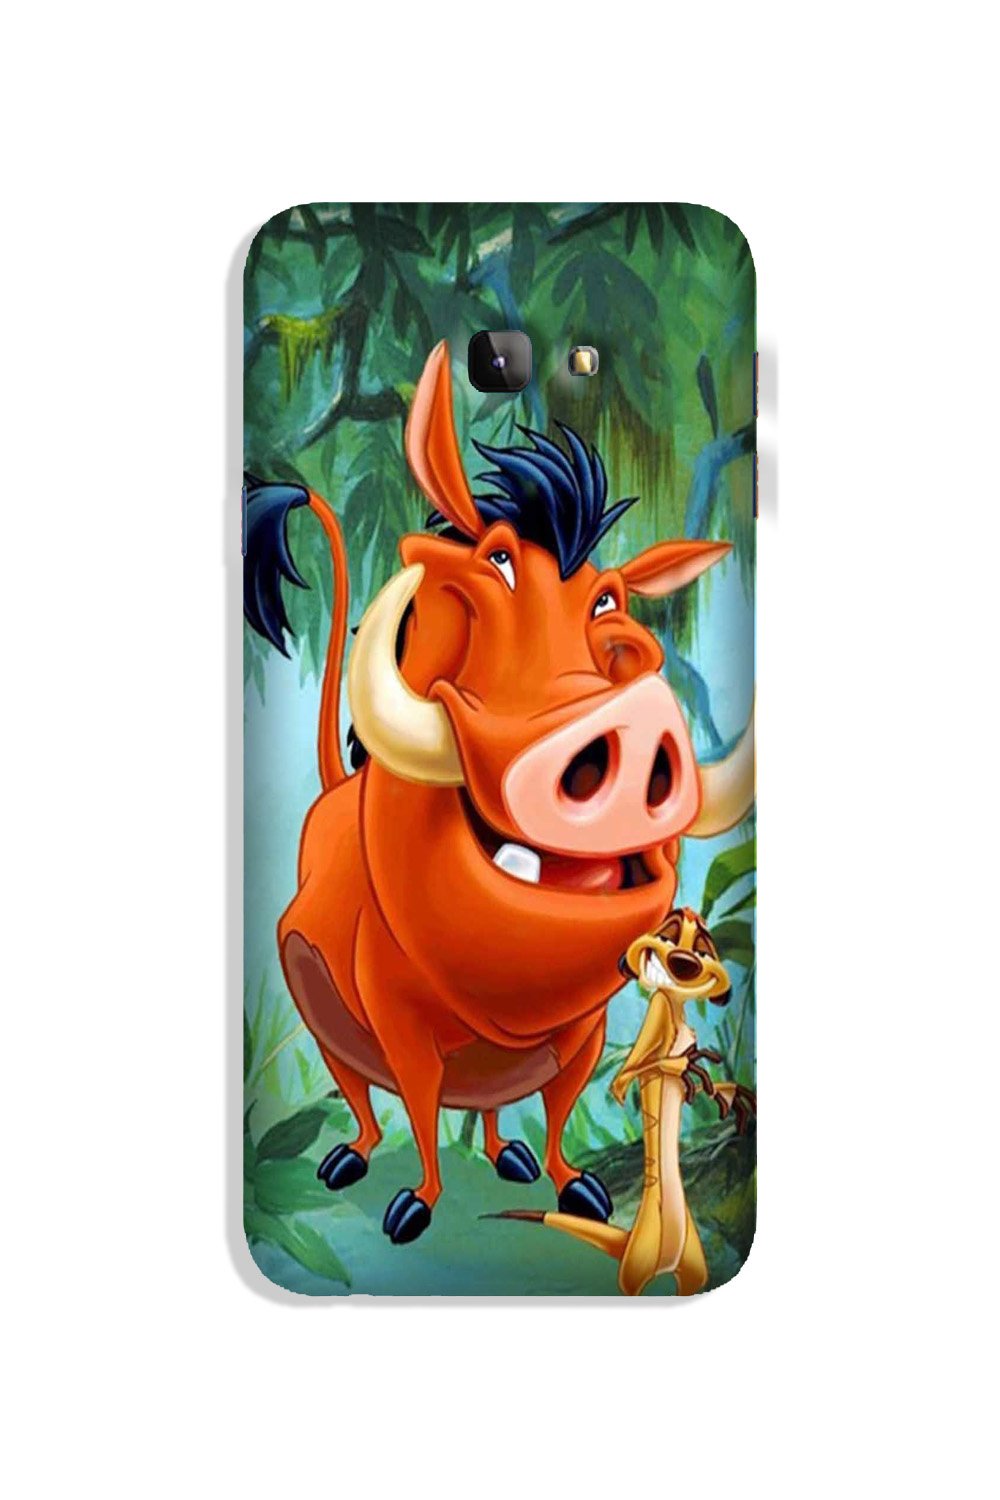 Timon and Pumbaa Mobile Back Case for Galaxy J4 Plus (Design - 305)